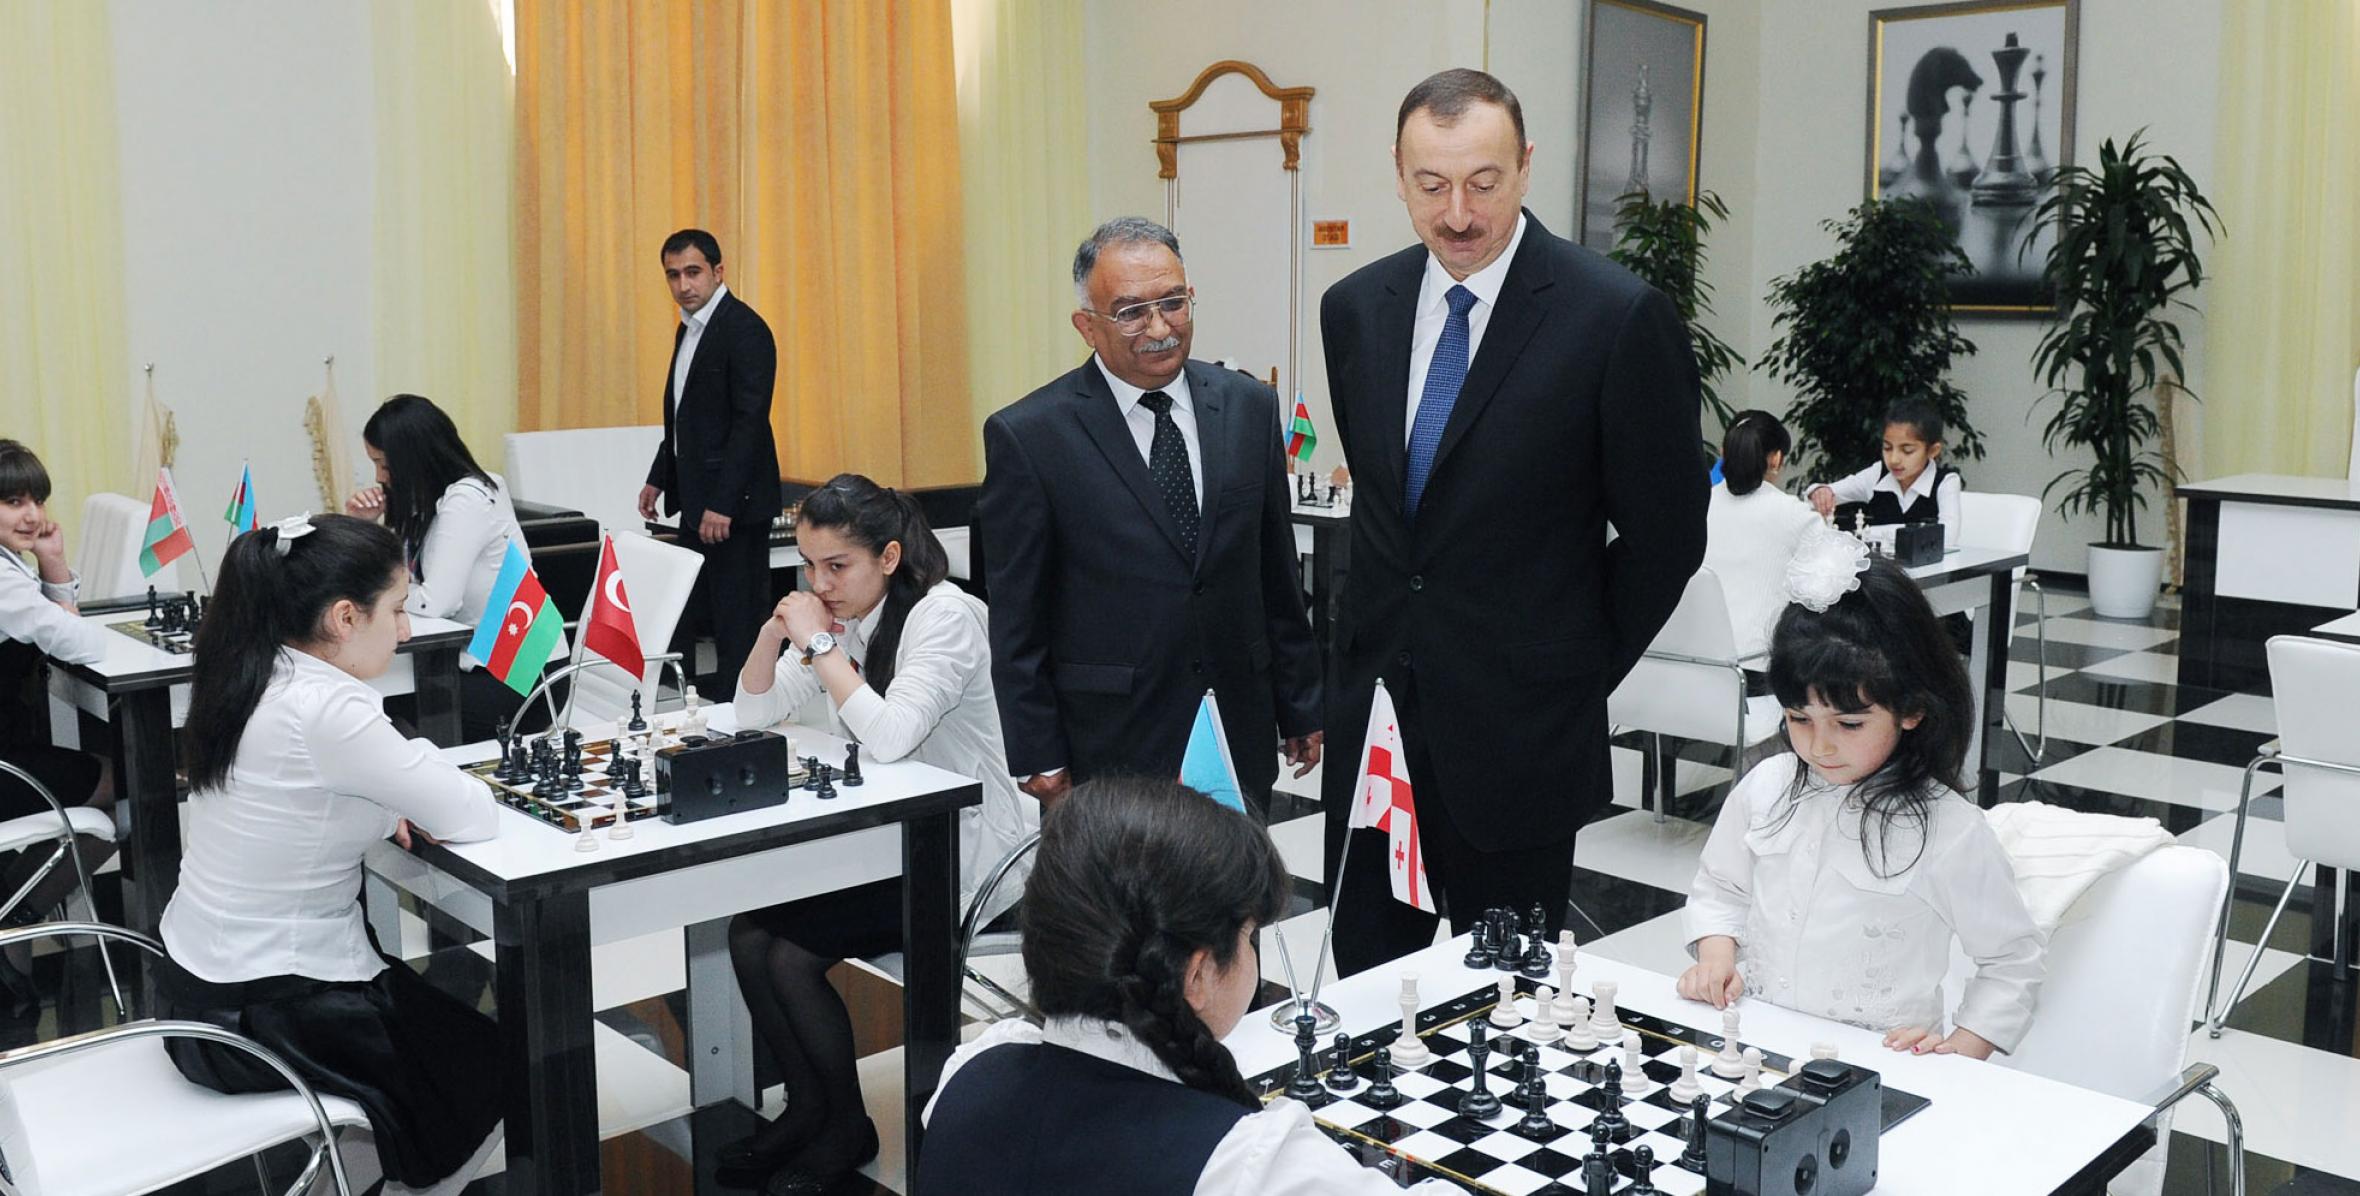 Ilham Aliyev attended the opening of a Chess Center in Gazakh